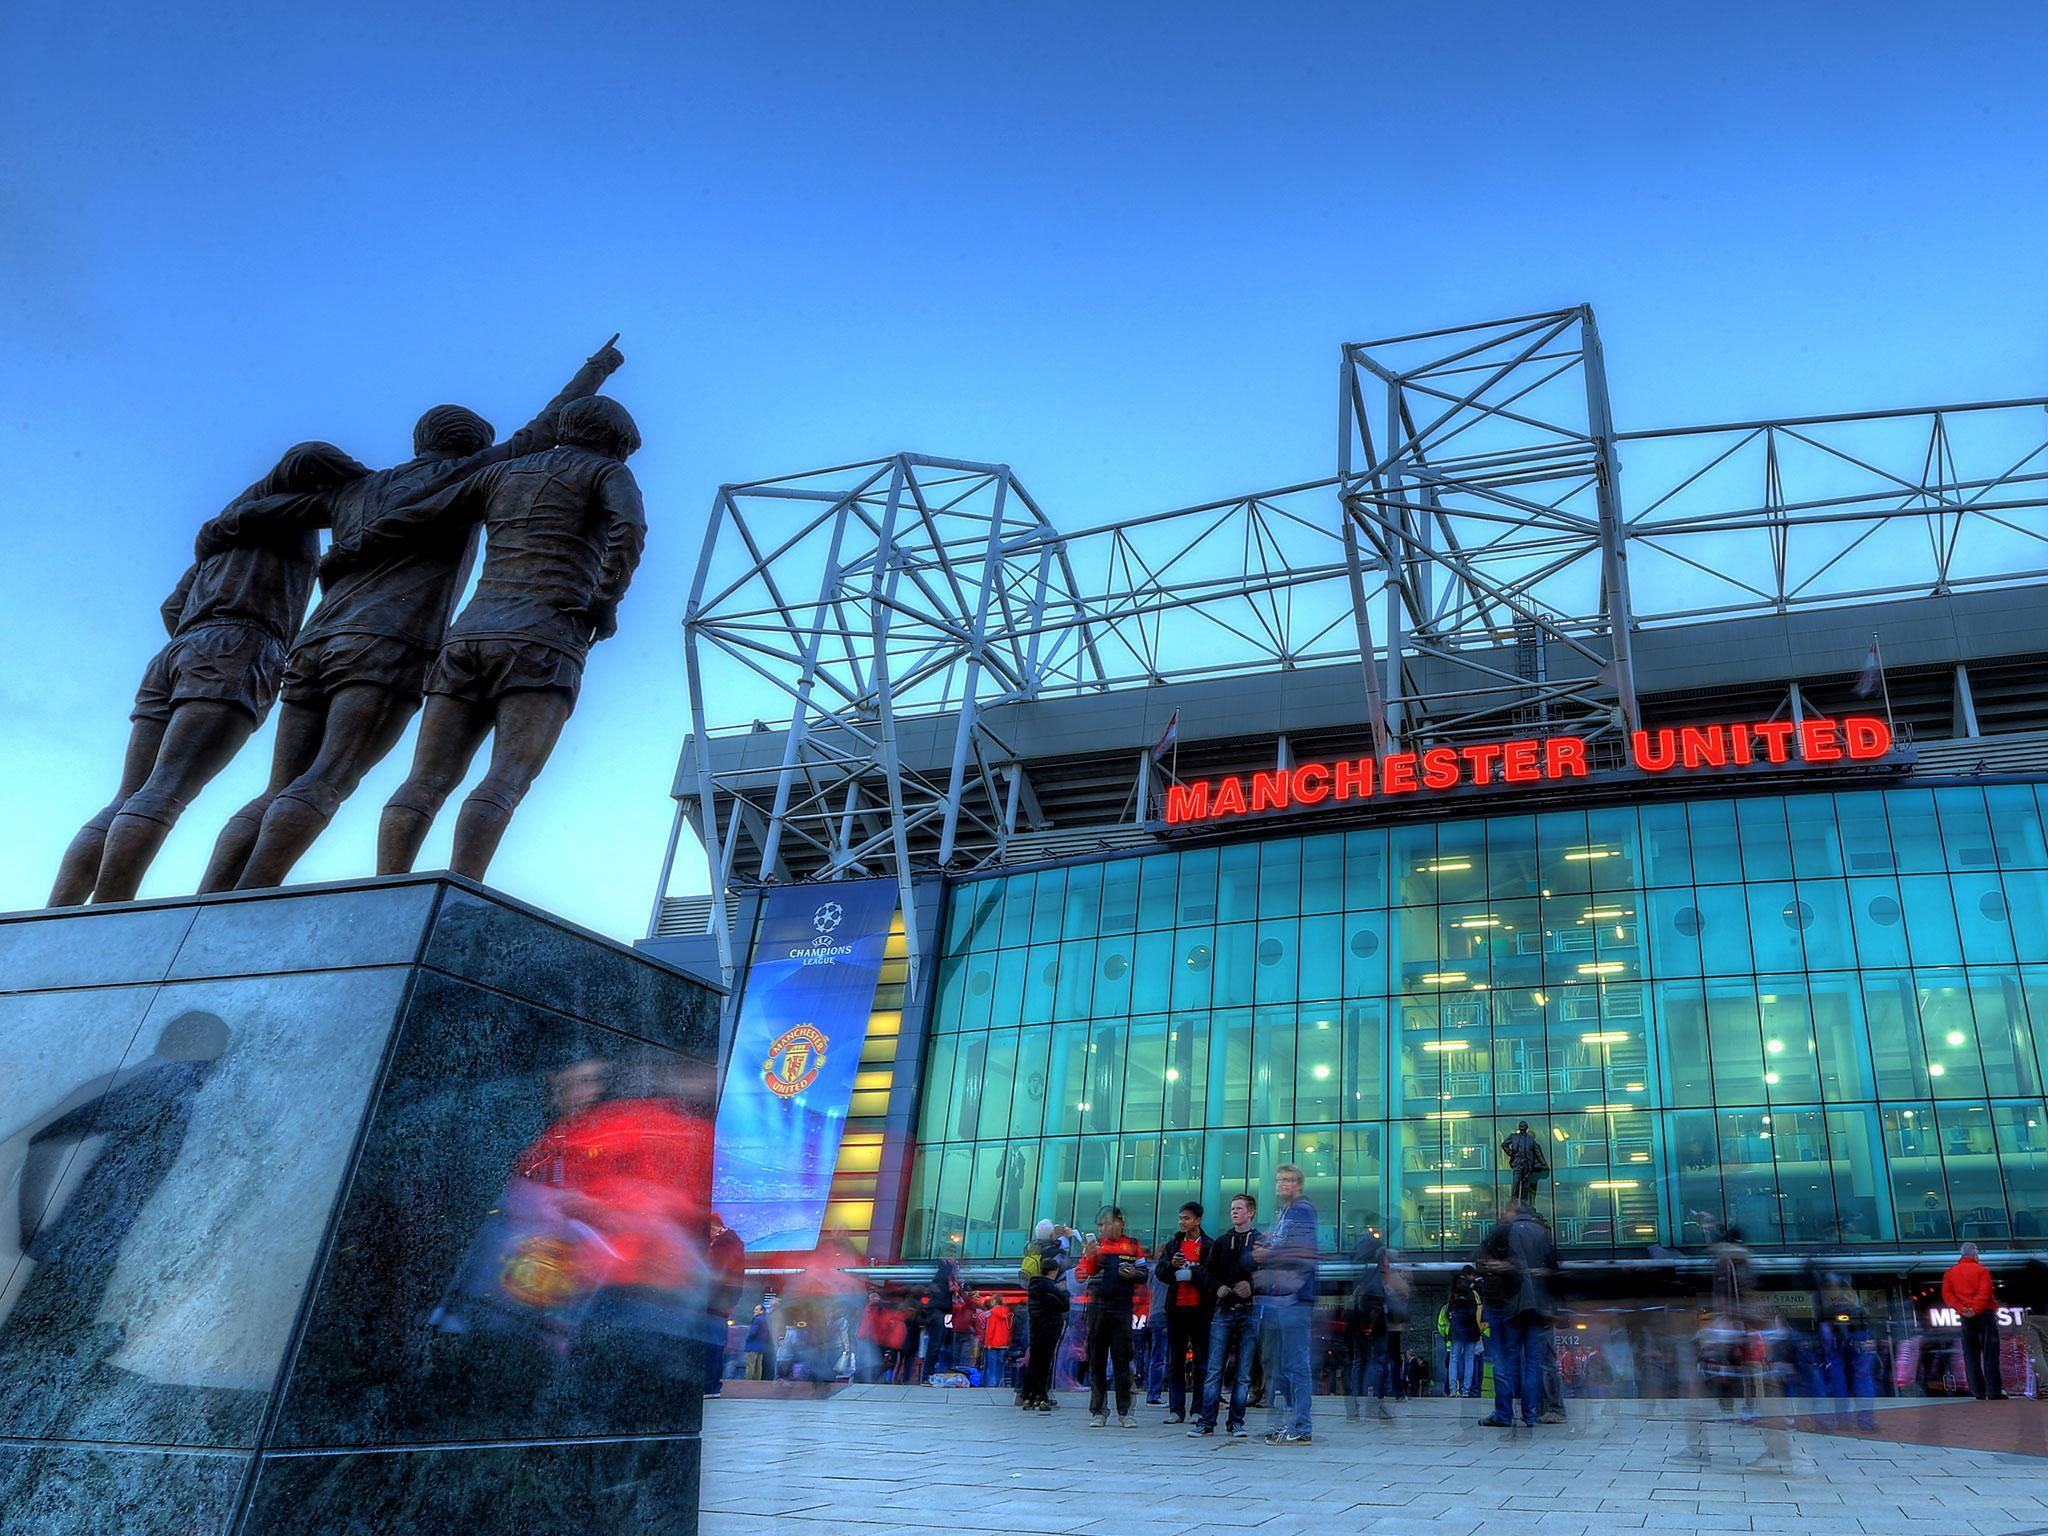 United are aware Old Trafford could be a target for terrorism